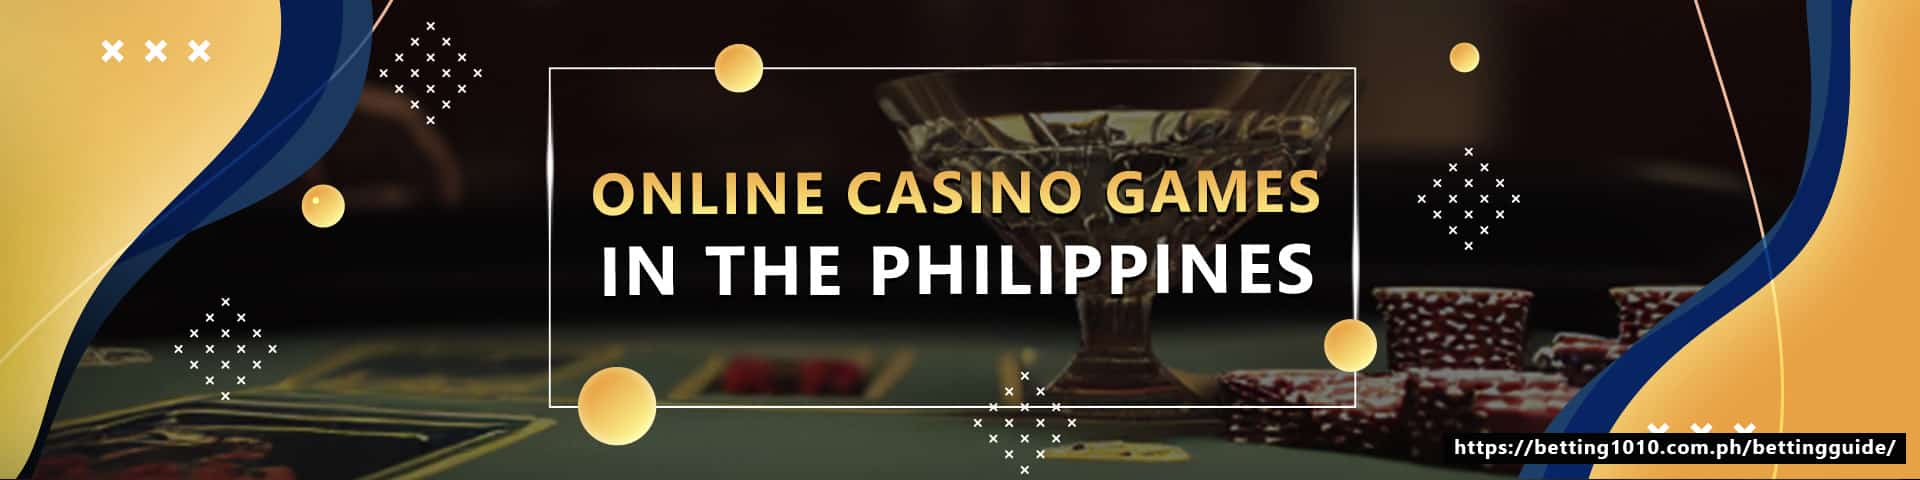 online casino games in the philippines